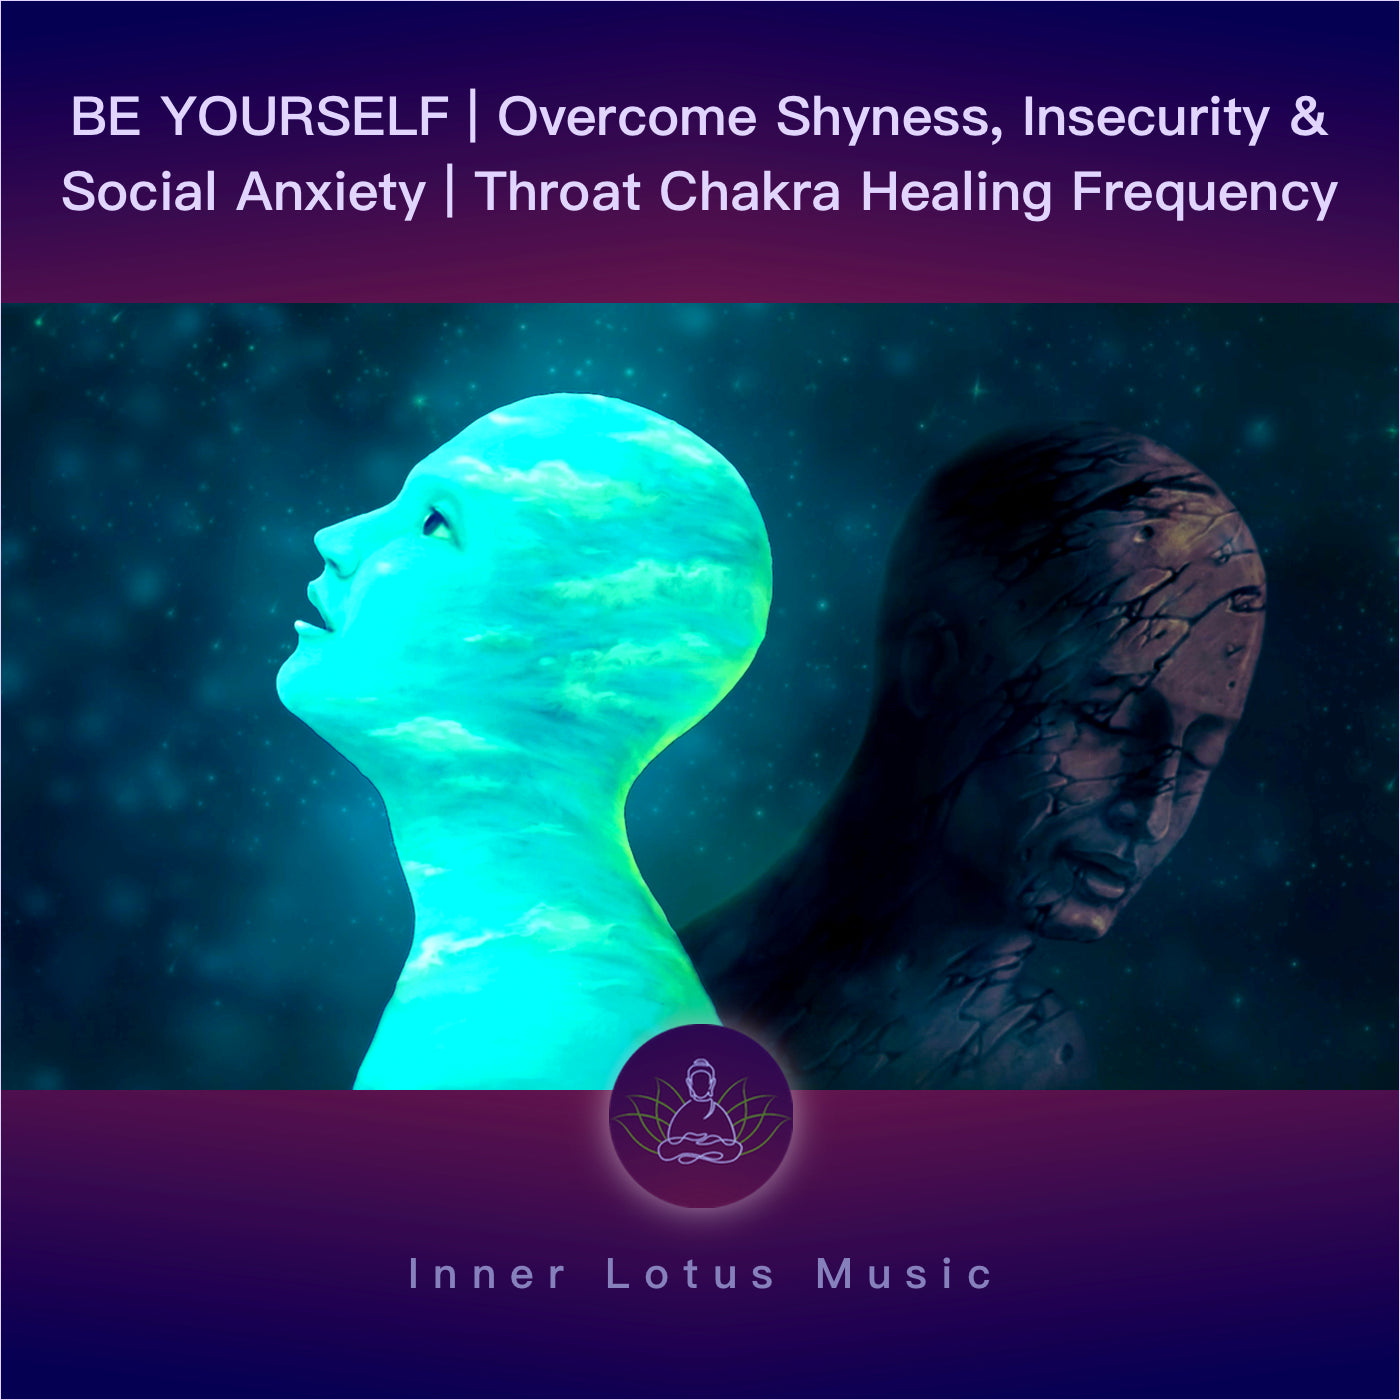 BE YOURSELF | Overcome Shyness, Insecurity & Social Anxiety | Throat Chakra Healing Frequency Music